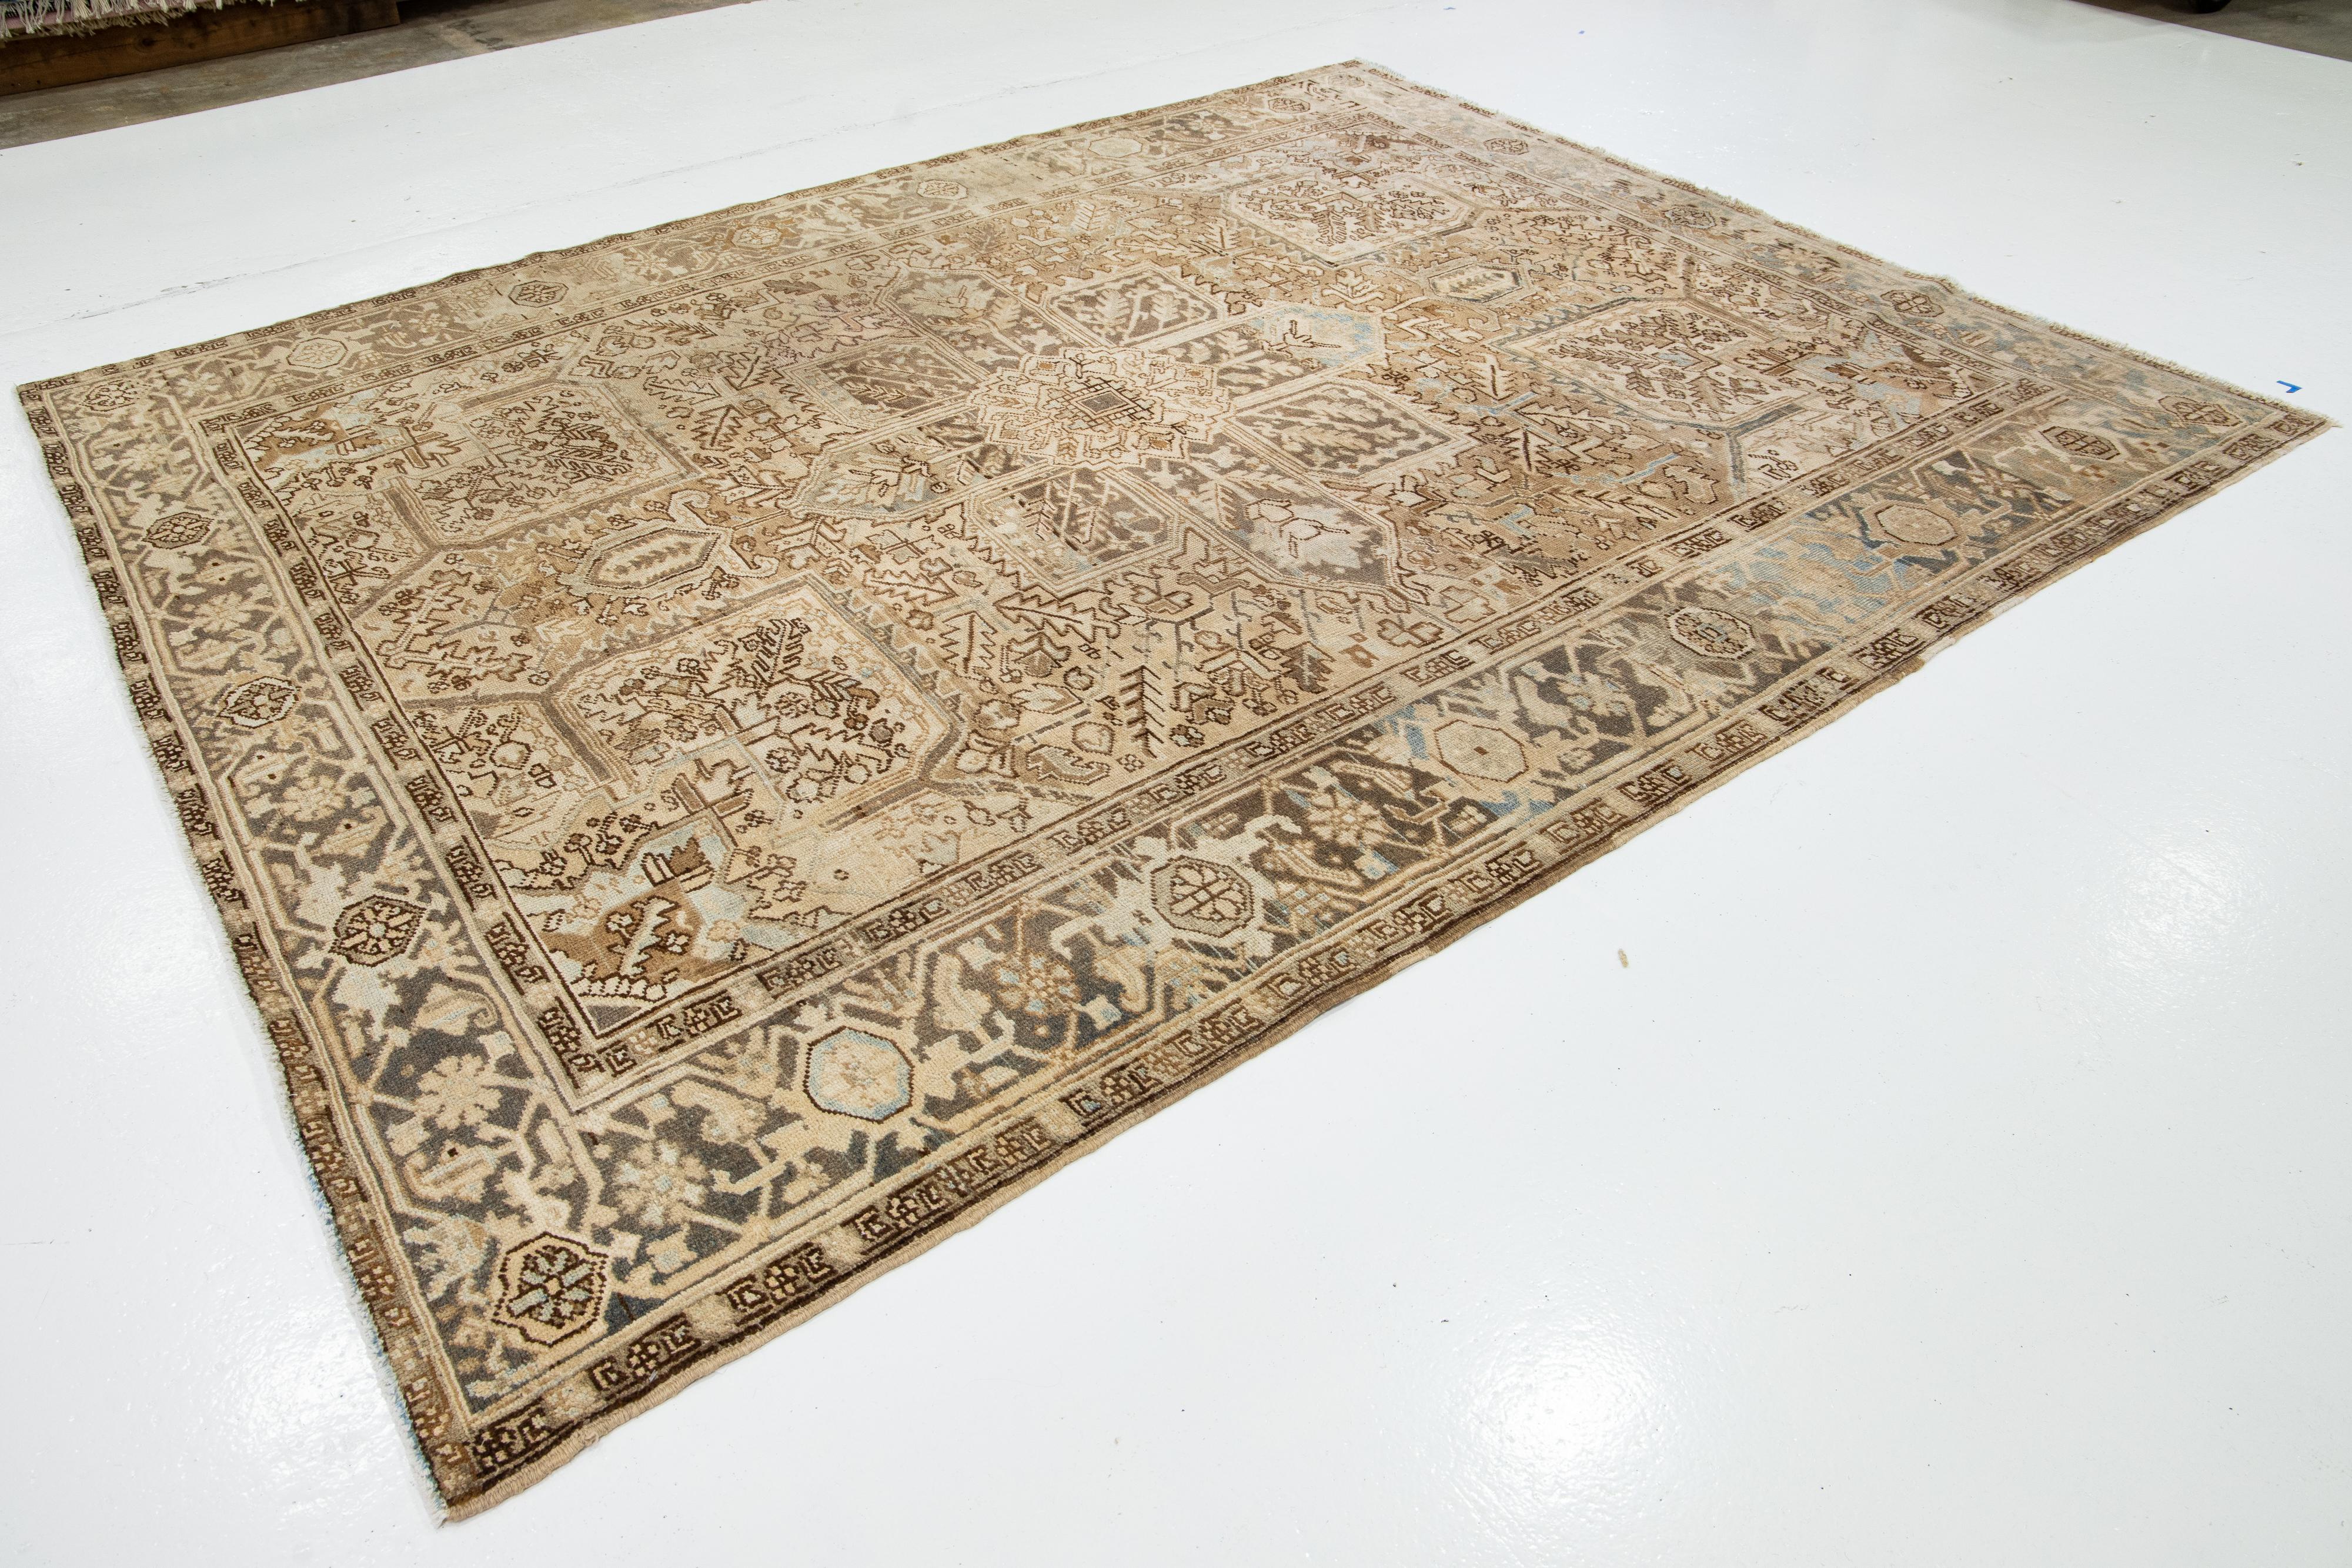  Allover Designed Persian Heriz Antique Wool Rug In light Brown From The 1920s In Excellent Condition For Sale In Norwalk, CT